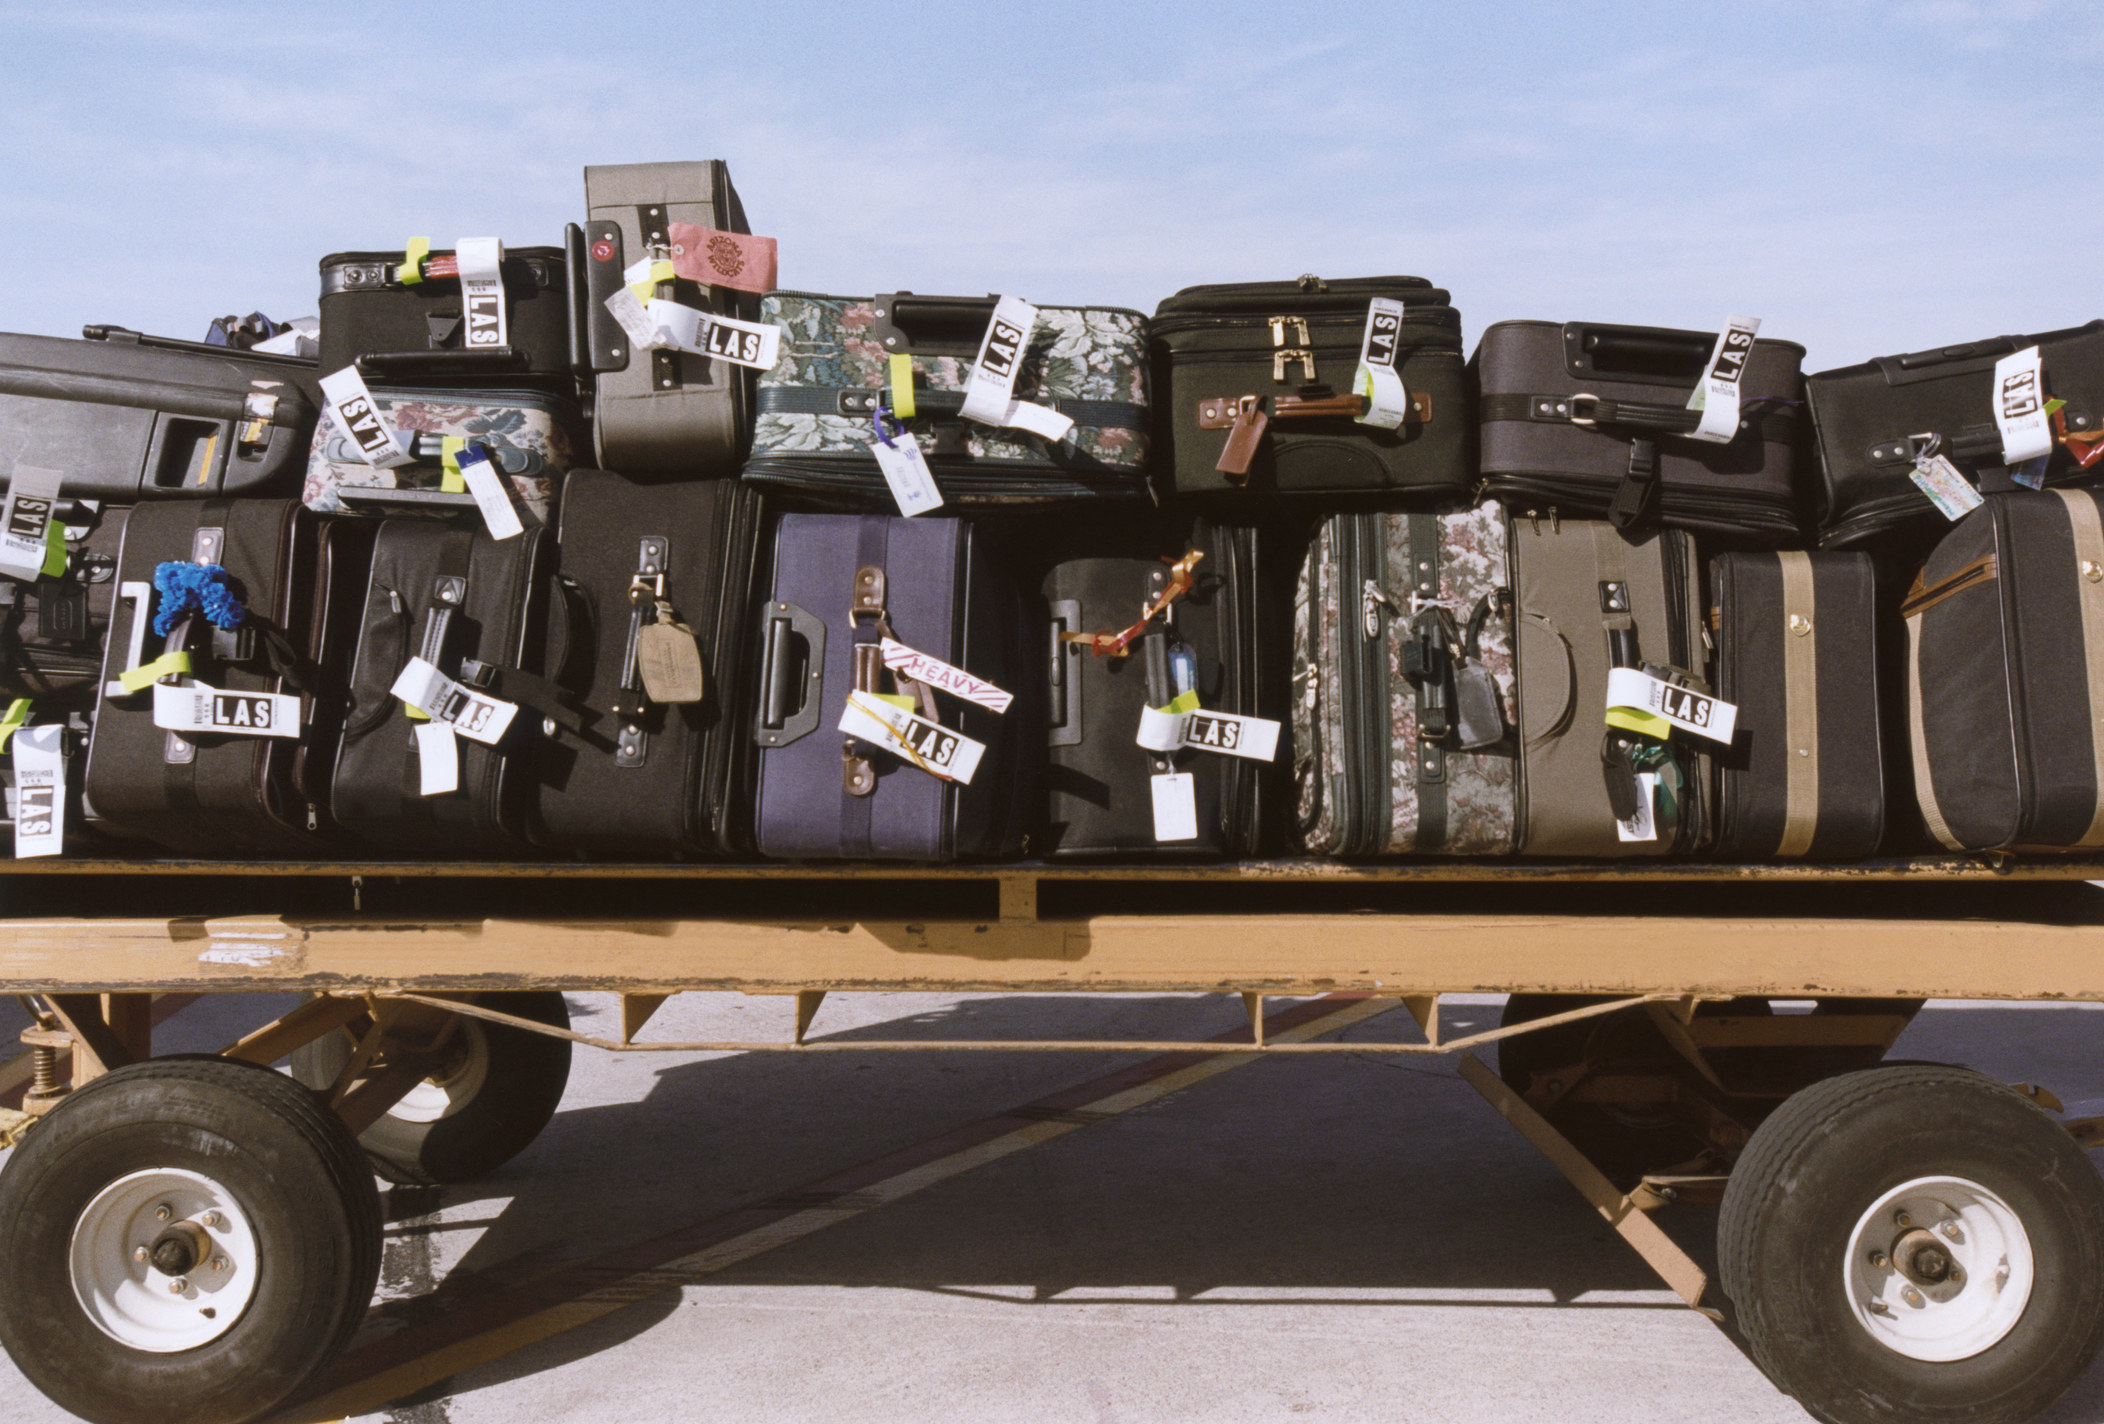 Suitcases on Luggage Cart.